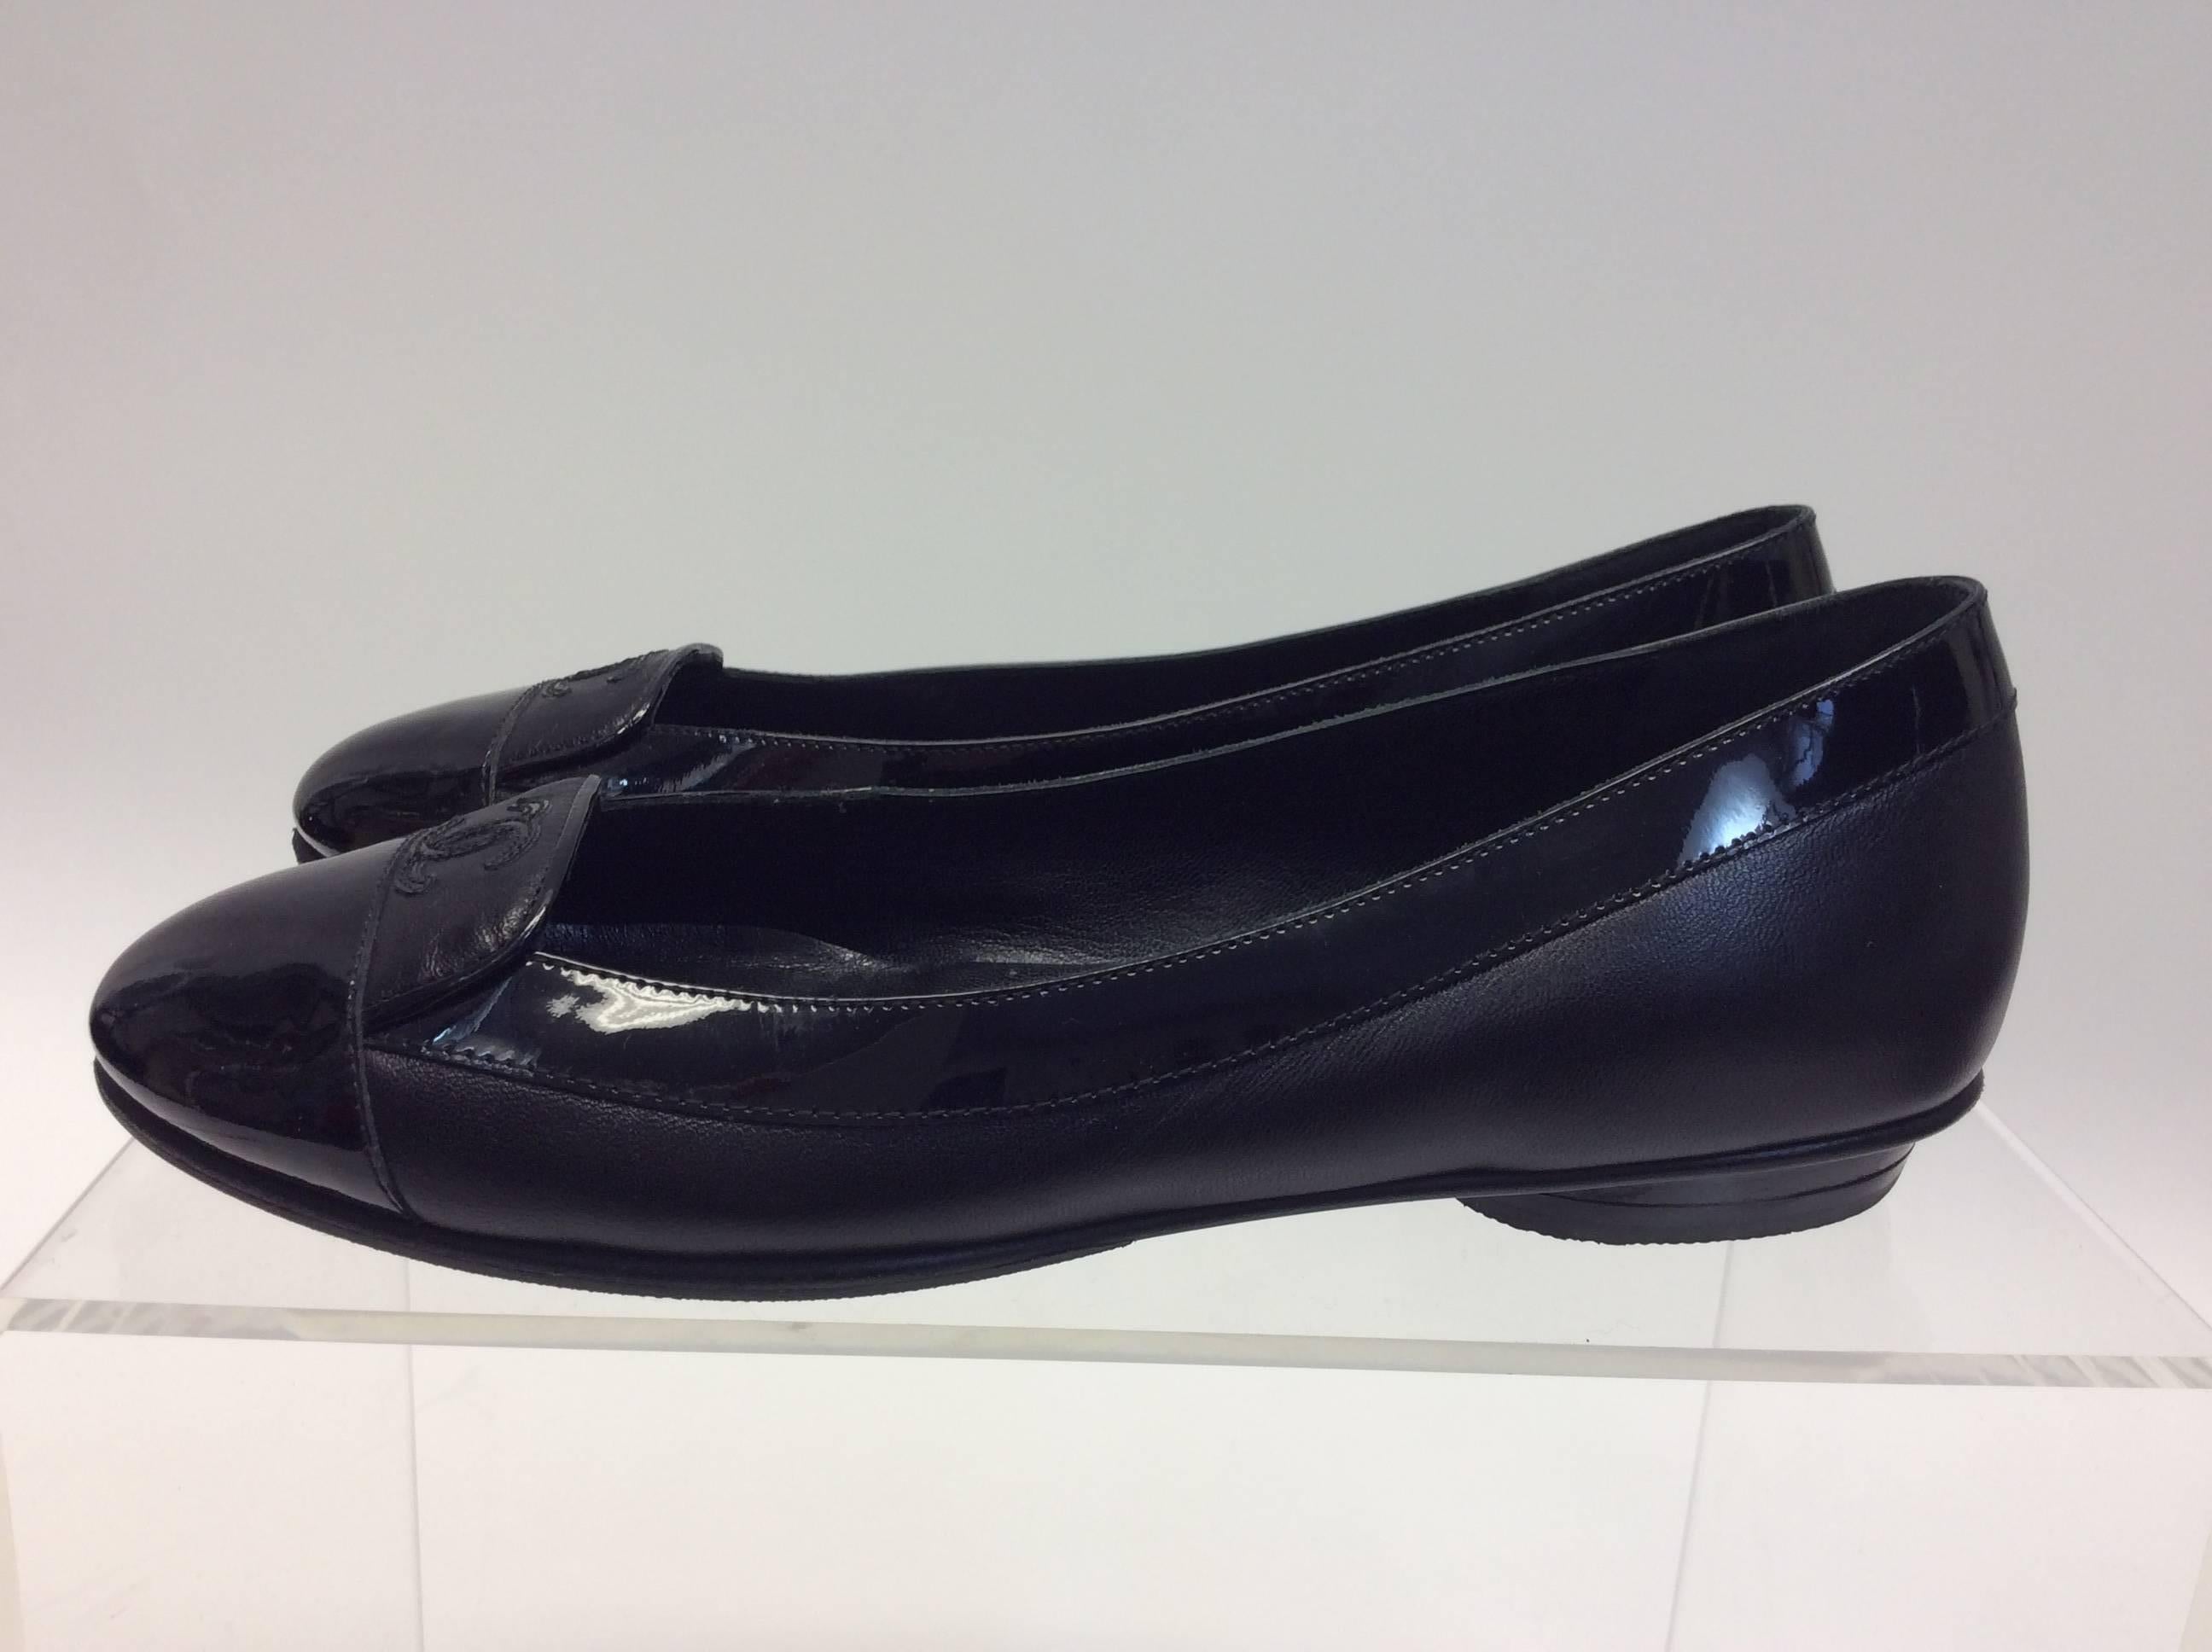 Chanel Black Leather Flats
$350
Made in Italy
Size 35